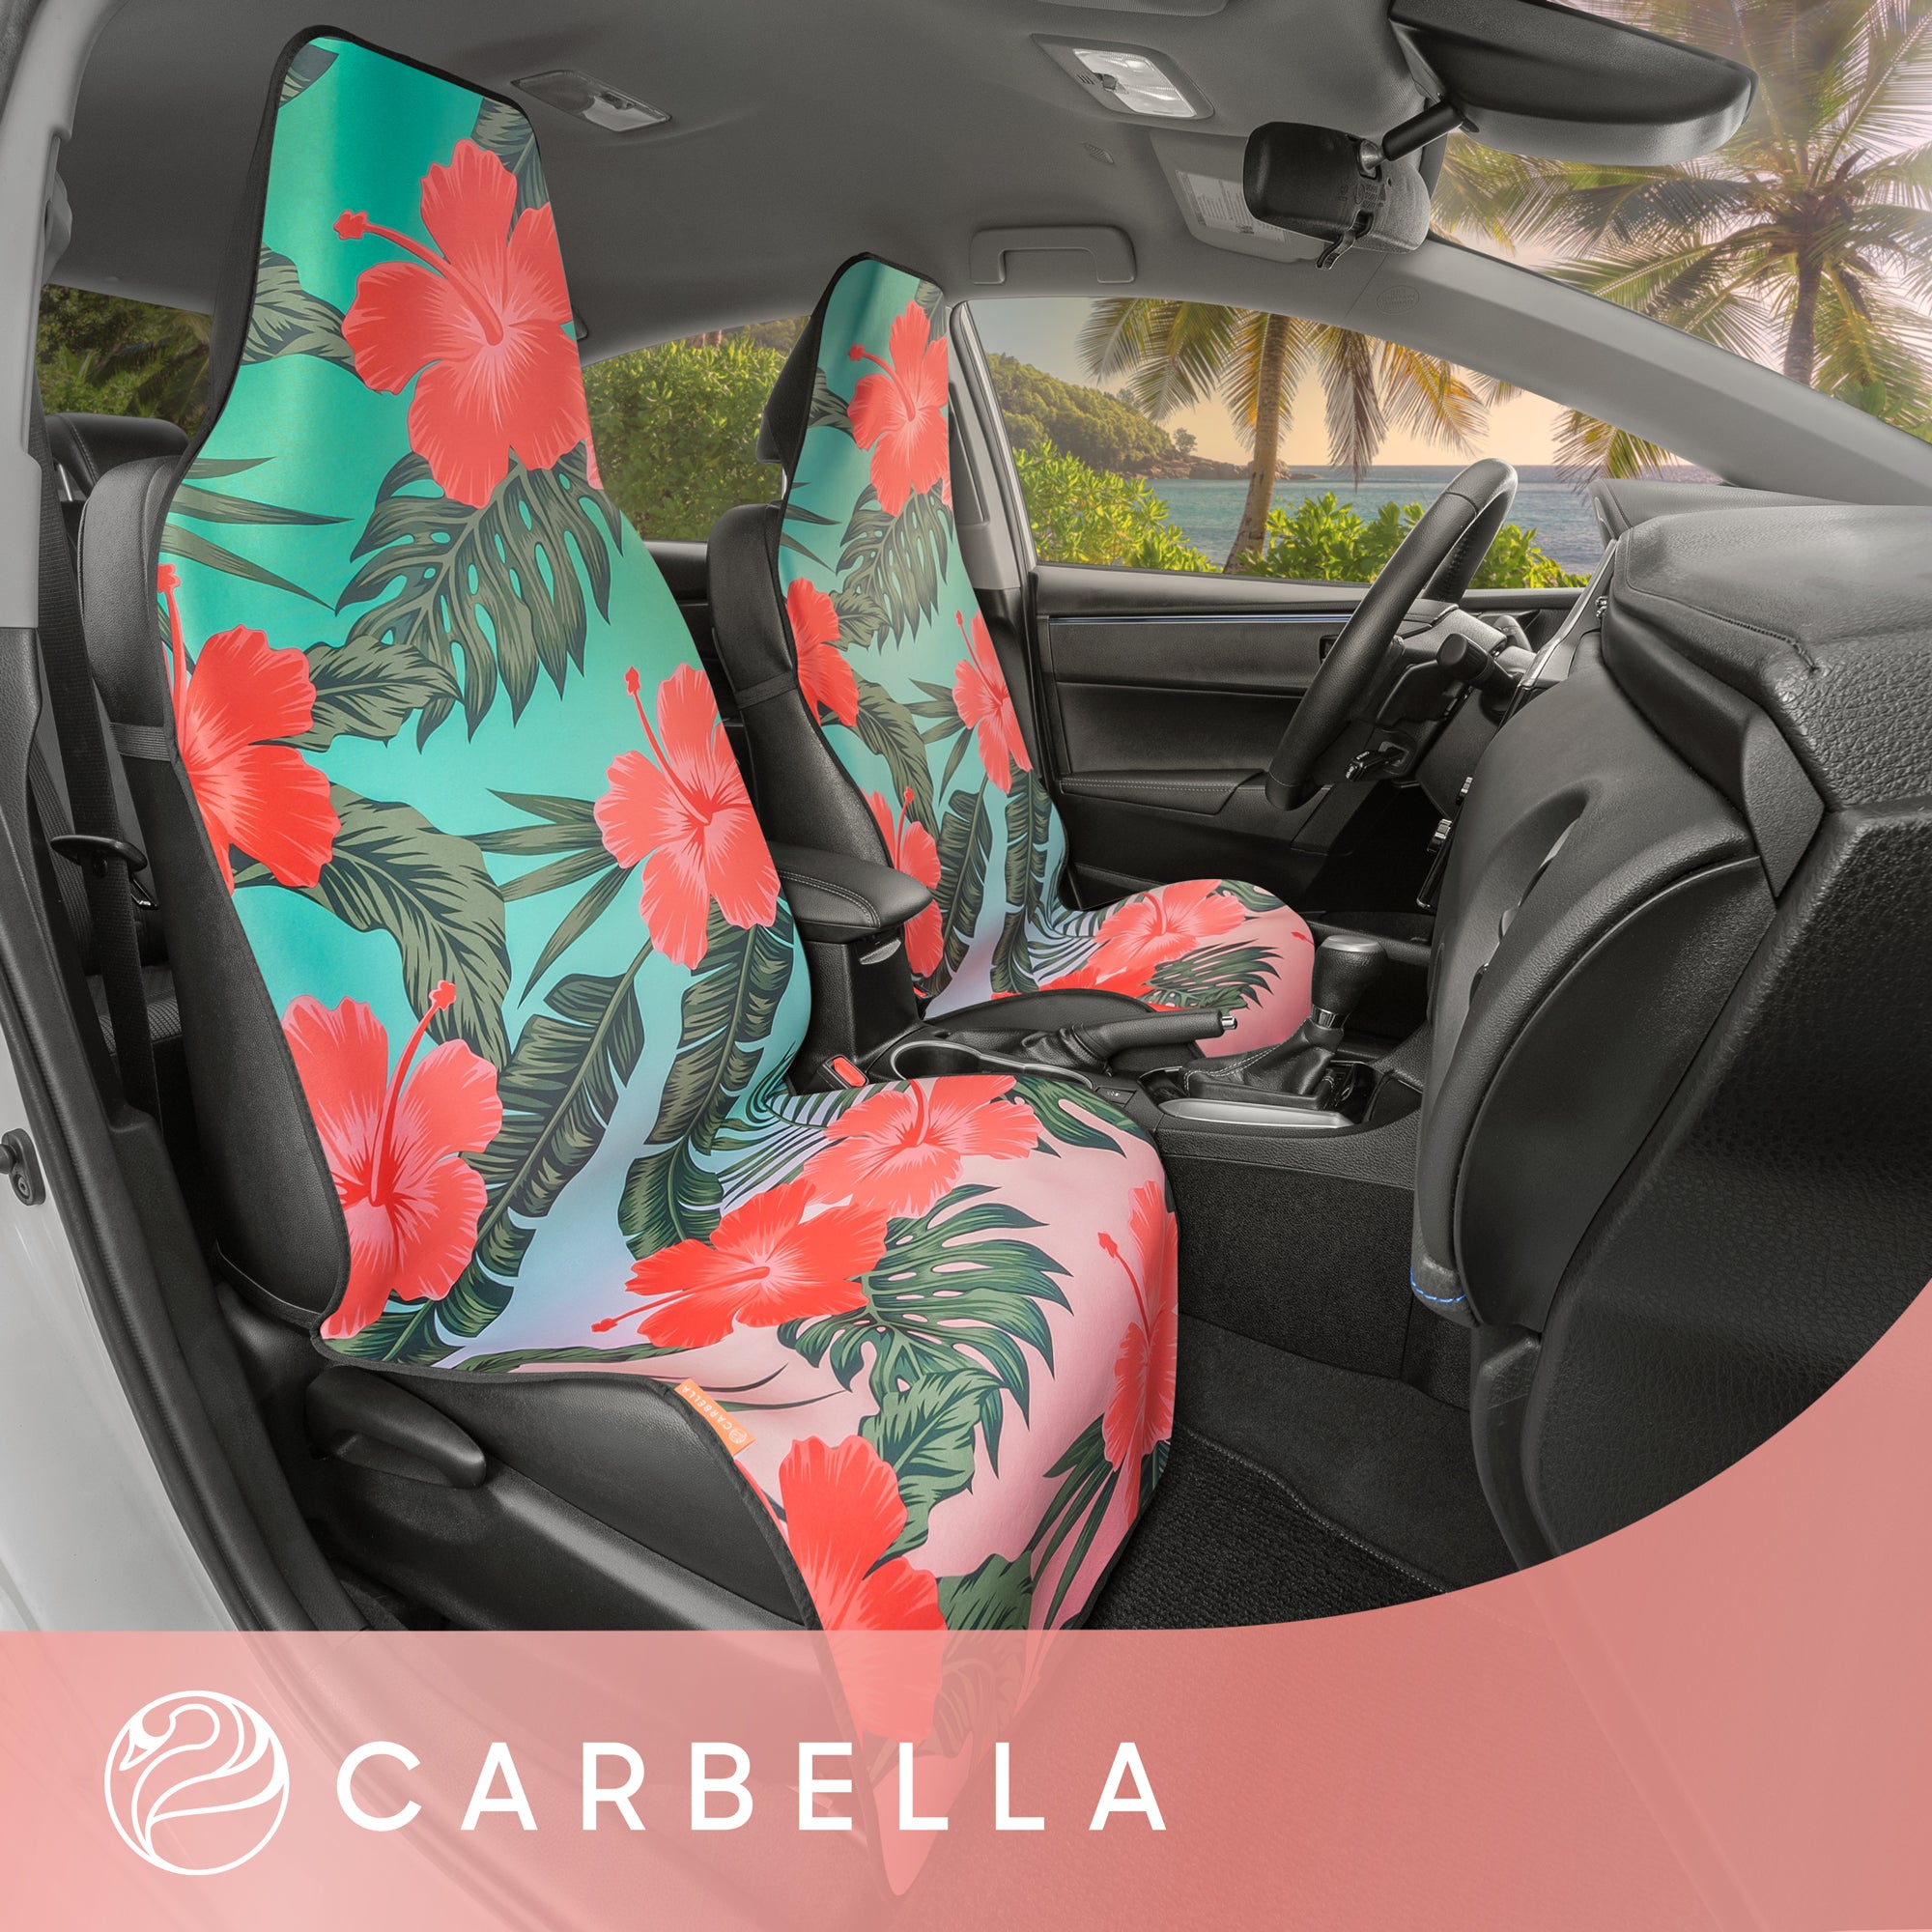 Carbella Coral Hawaiian Floral Car Seat Covers, 2 Pack Flower Print Gradient Seat Covers for Cars Trucks SUV, Car Accessories for Women